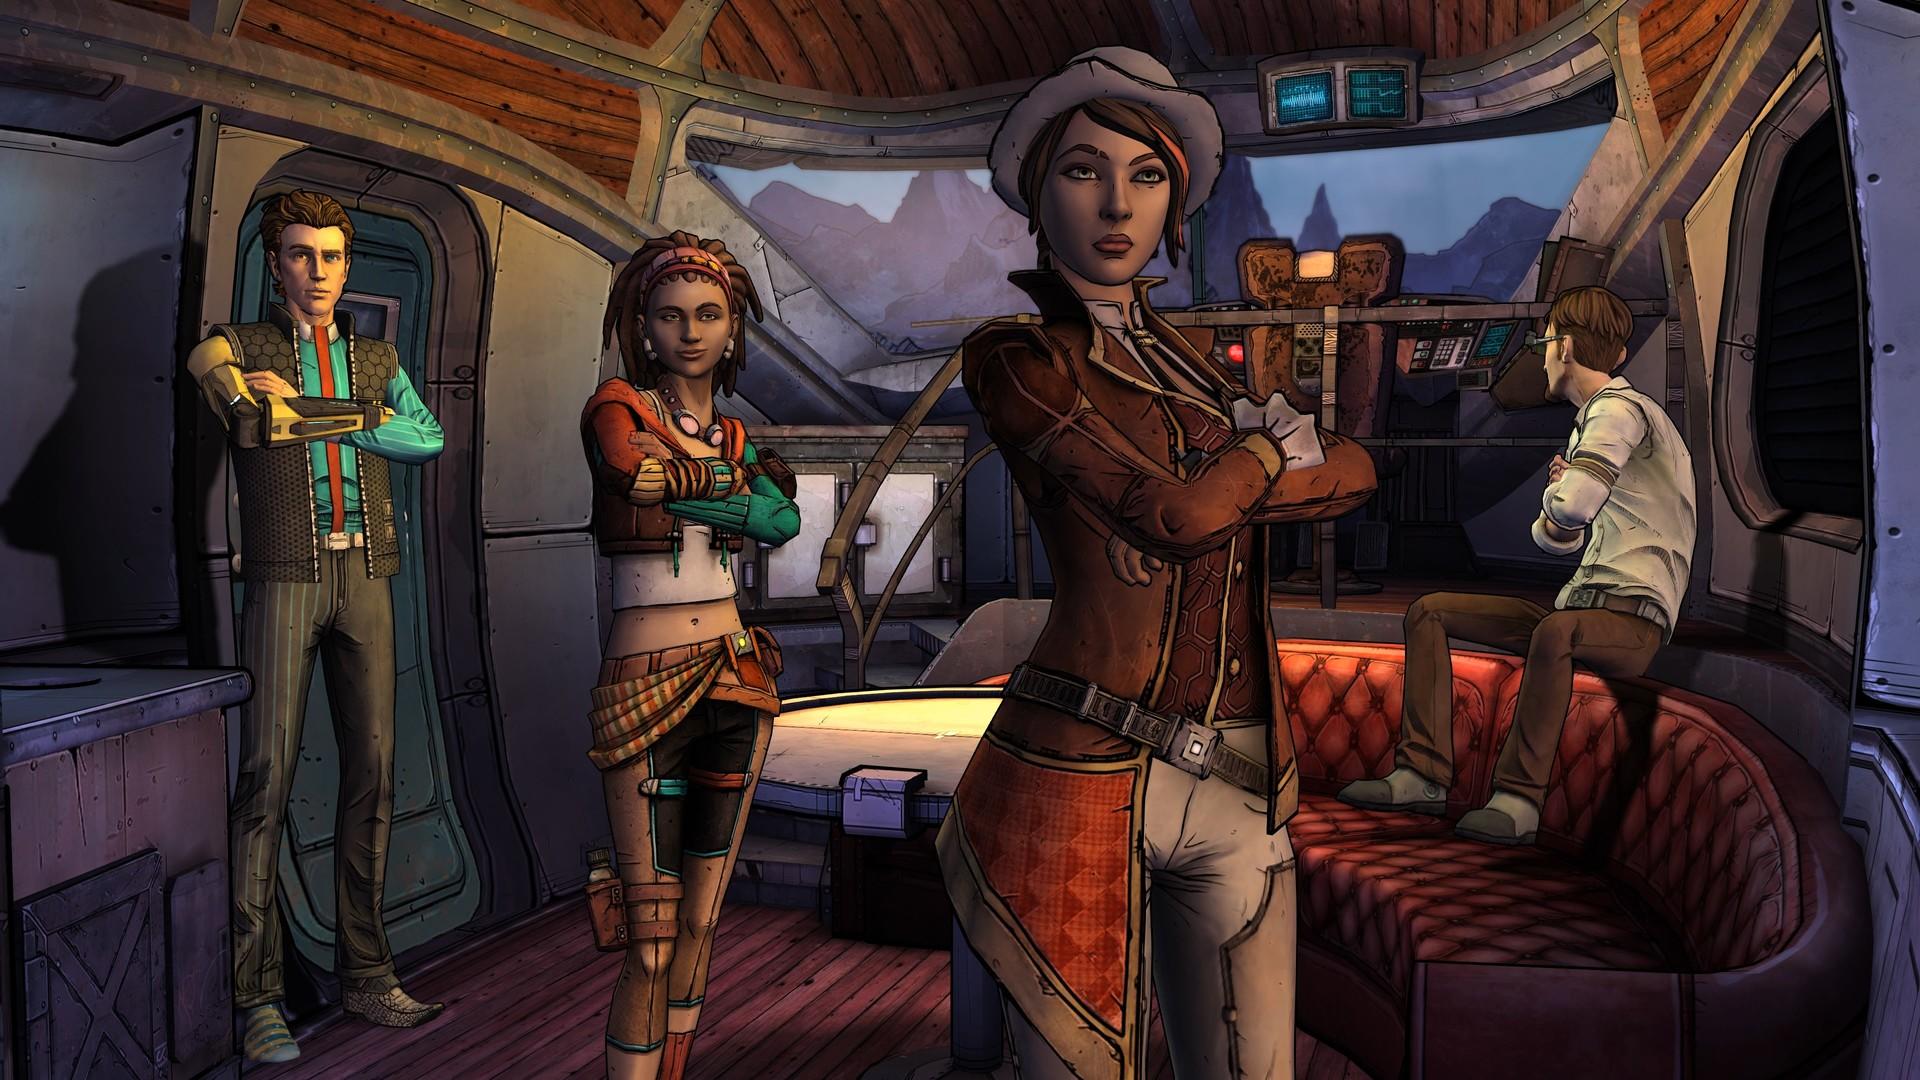 Screenshot of Tales from the Borderlands